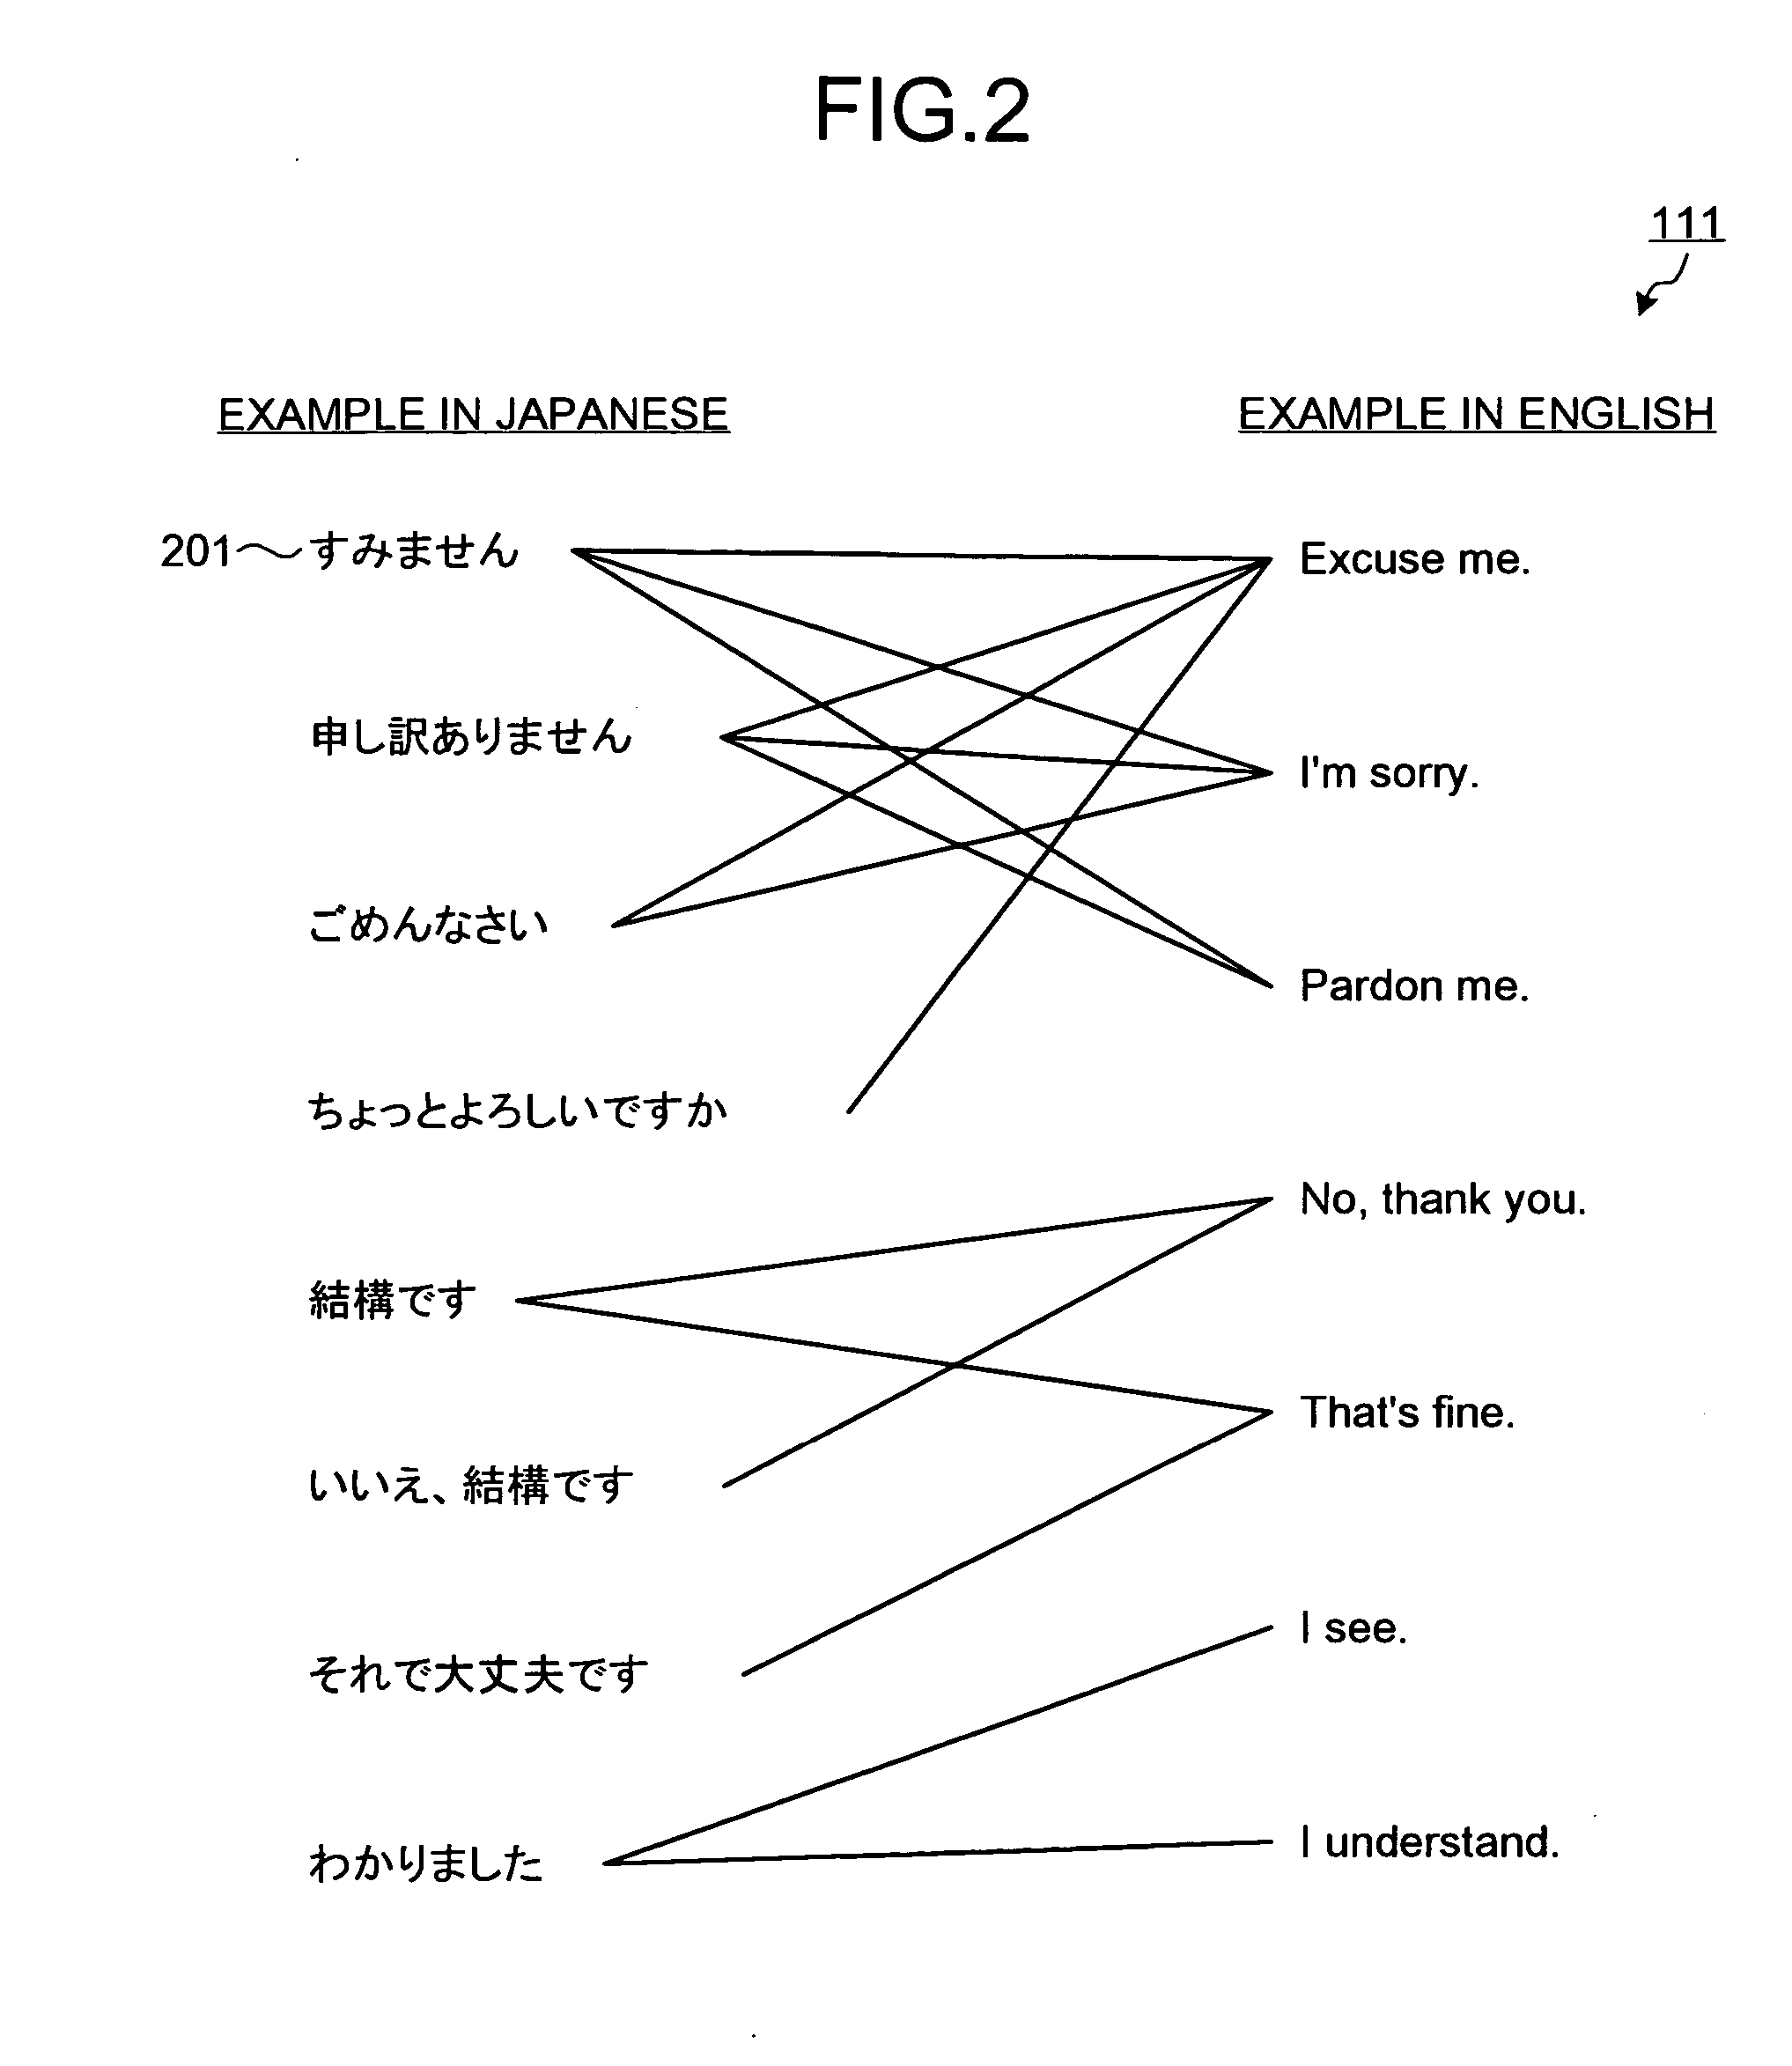 Apparatus, method and computer program product for translating speech input using example